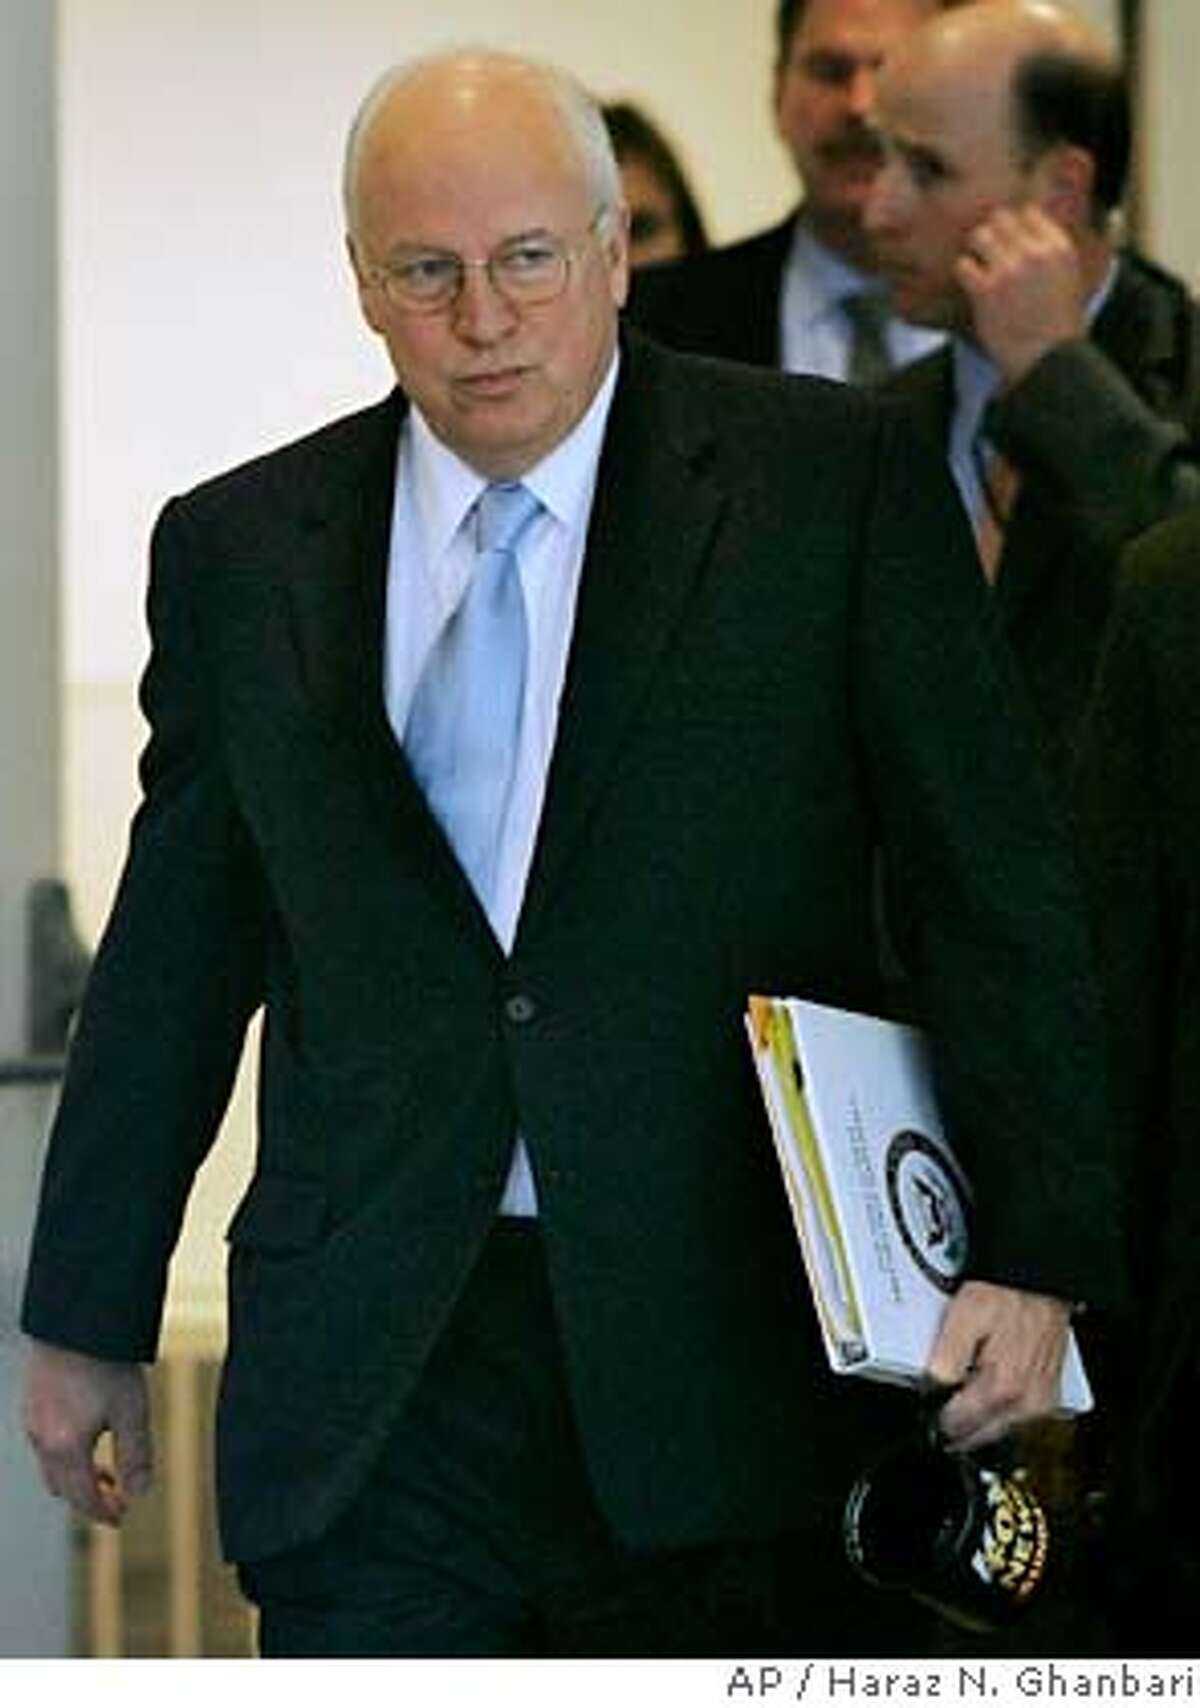 Vice President Dick Cheney leaves after an interview with Fox News Sunday at their offices in Washington Sunday, Jan. 14, 2007. Cheney said that congressional opposition will not influence President Bush's plans to send more troops to Iraq. "The president is the commander in chief. He's the one who has to make these tough decisions," Cheney said during the interview. (AP Photo/Haraz N. Ghanbari)